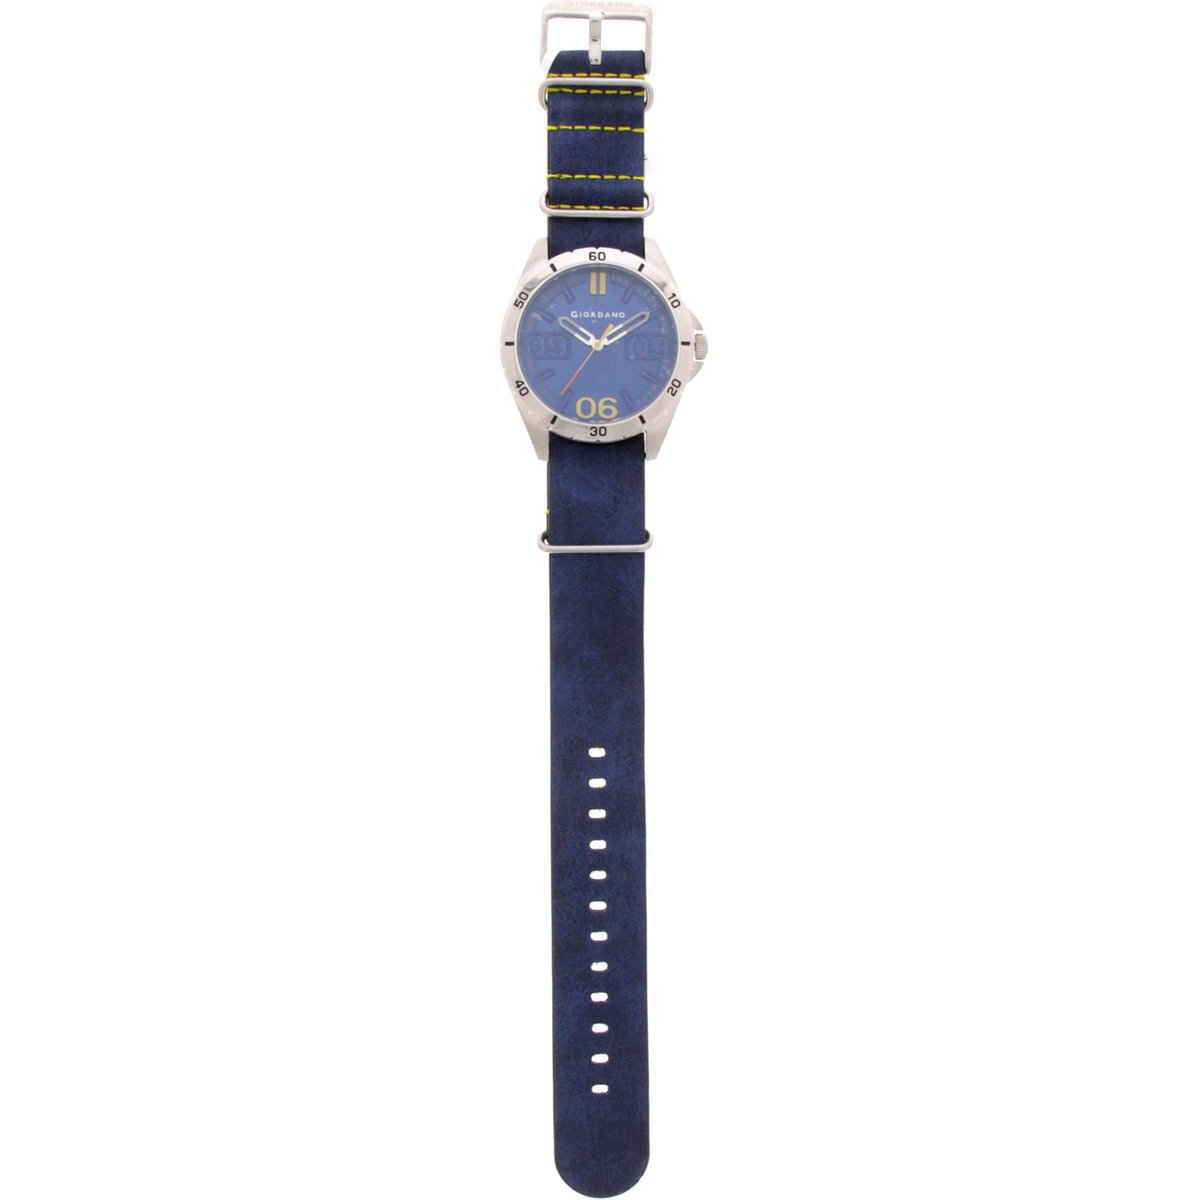 Giordano Men's Analog Watch Blue Strap With Blue Dial 1783-02